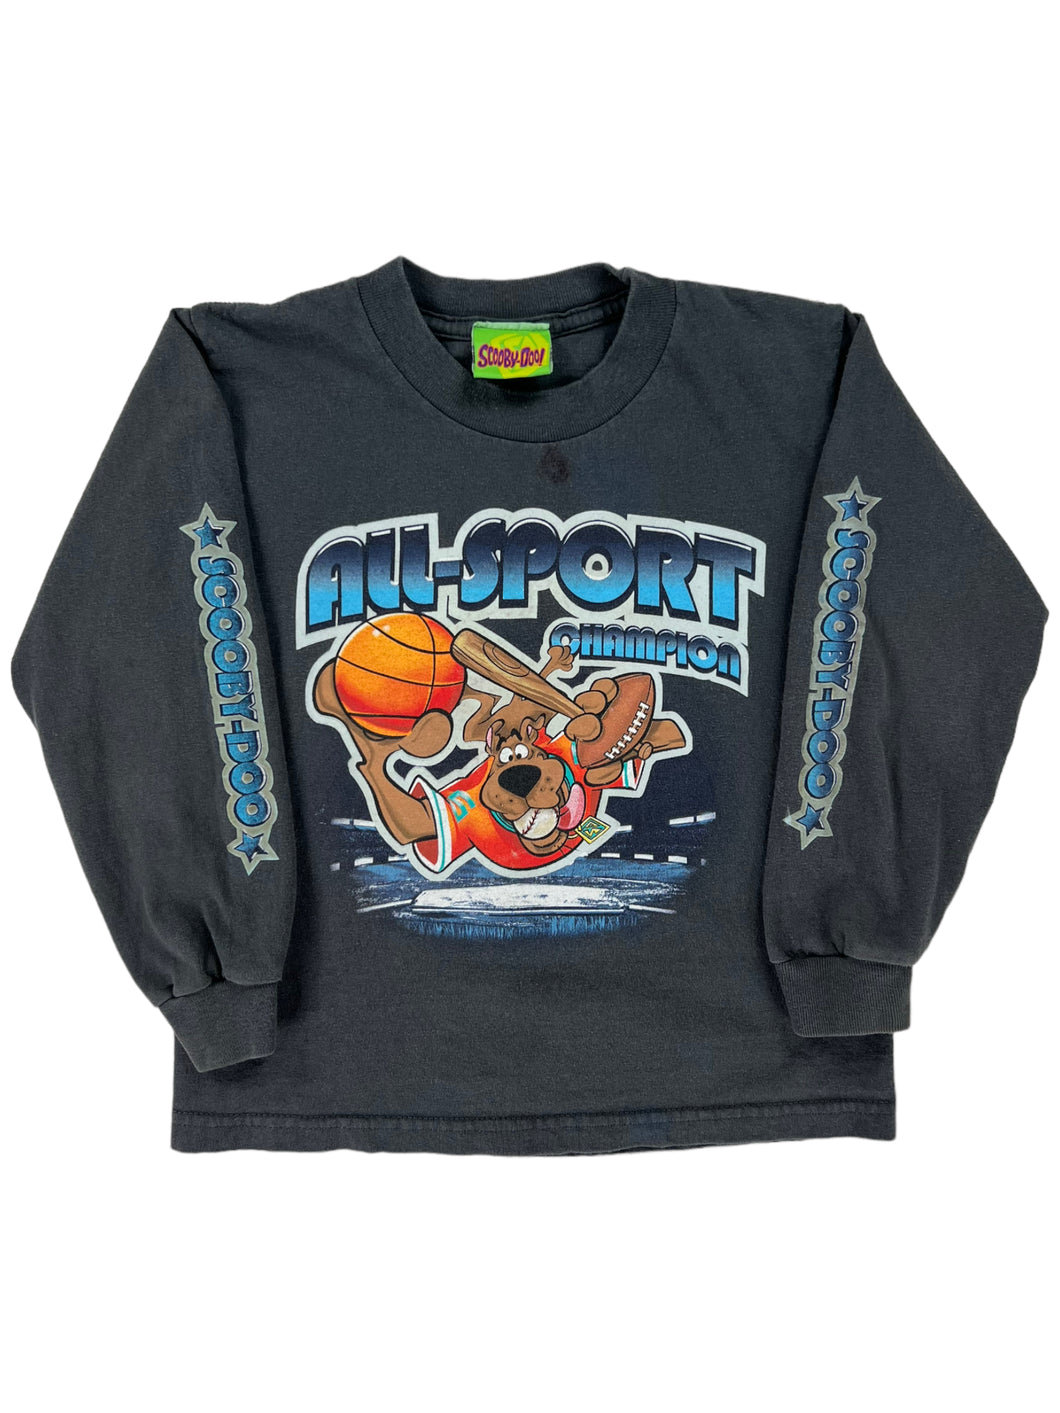 2005 Scooby Doo All Sport Champion YOUTH long sleeve tee (M)